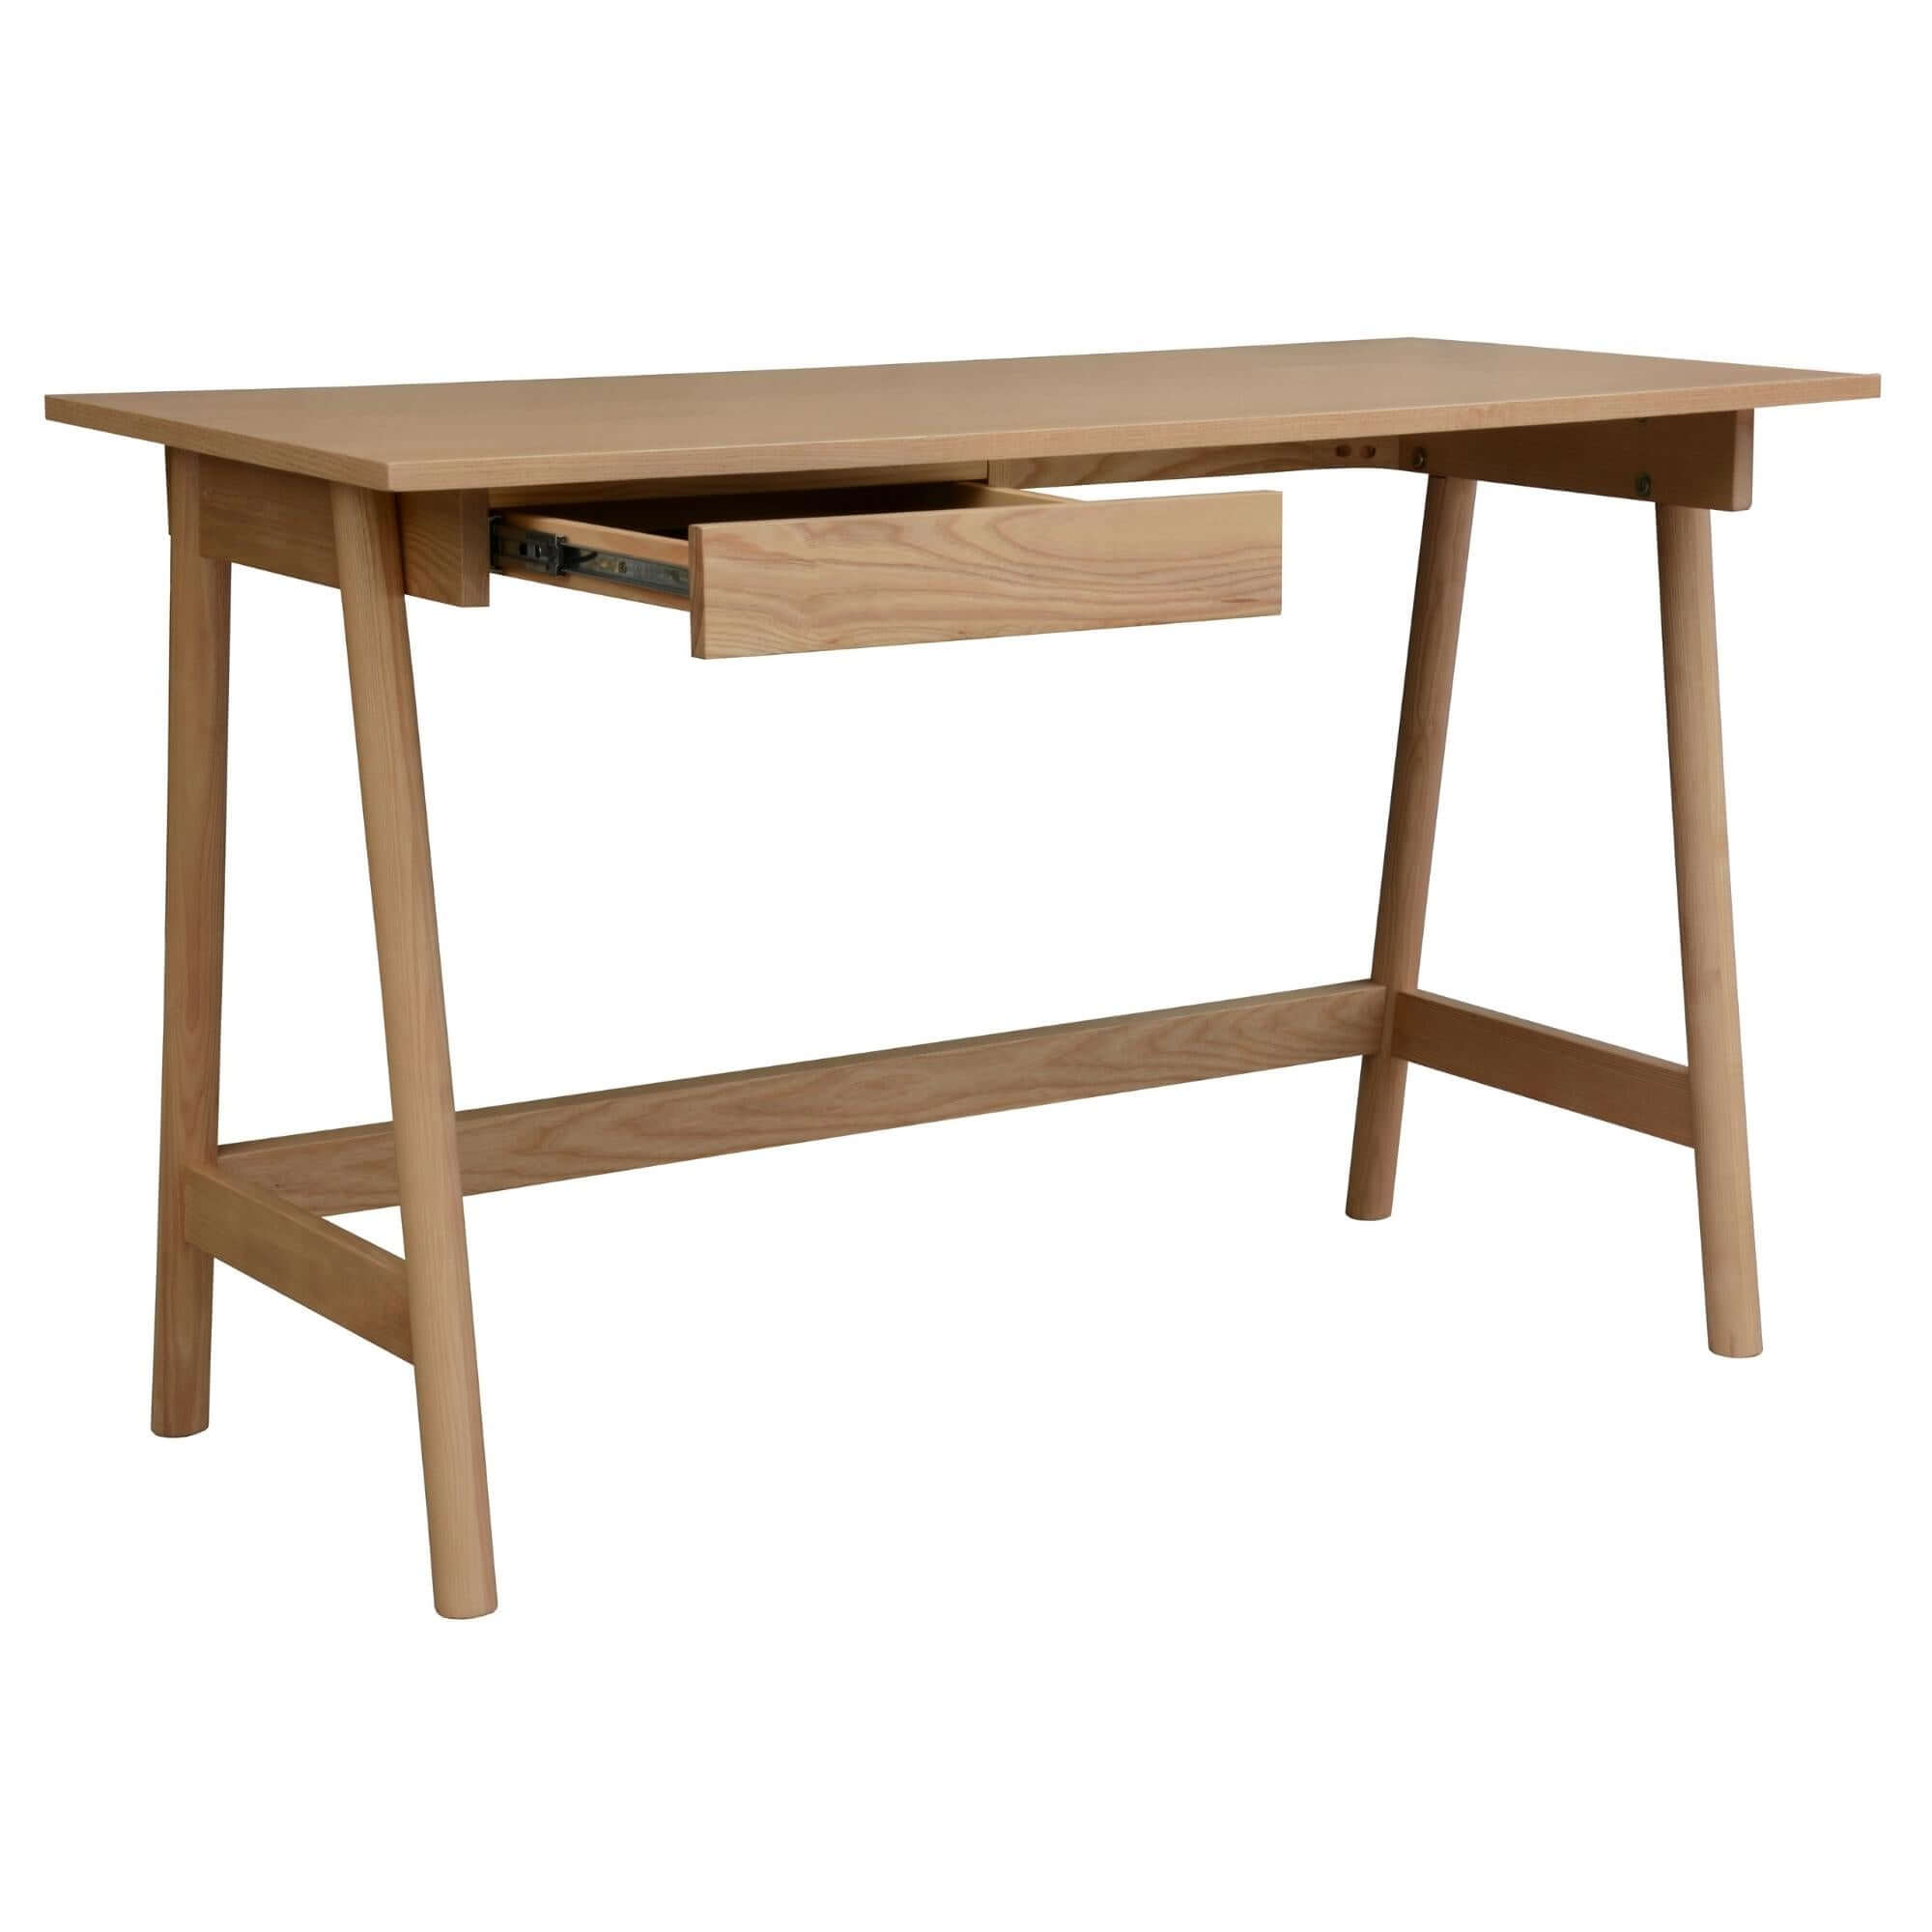 Mindil Office Desk Student Study Table Solid Wooden Timber Frame - Ash Natural-Upinteriors